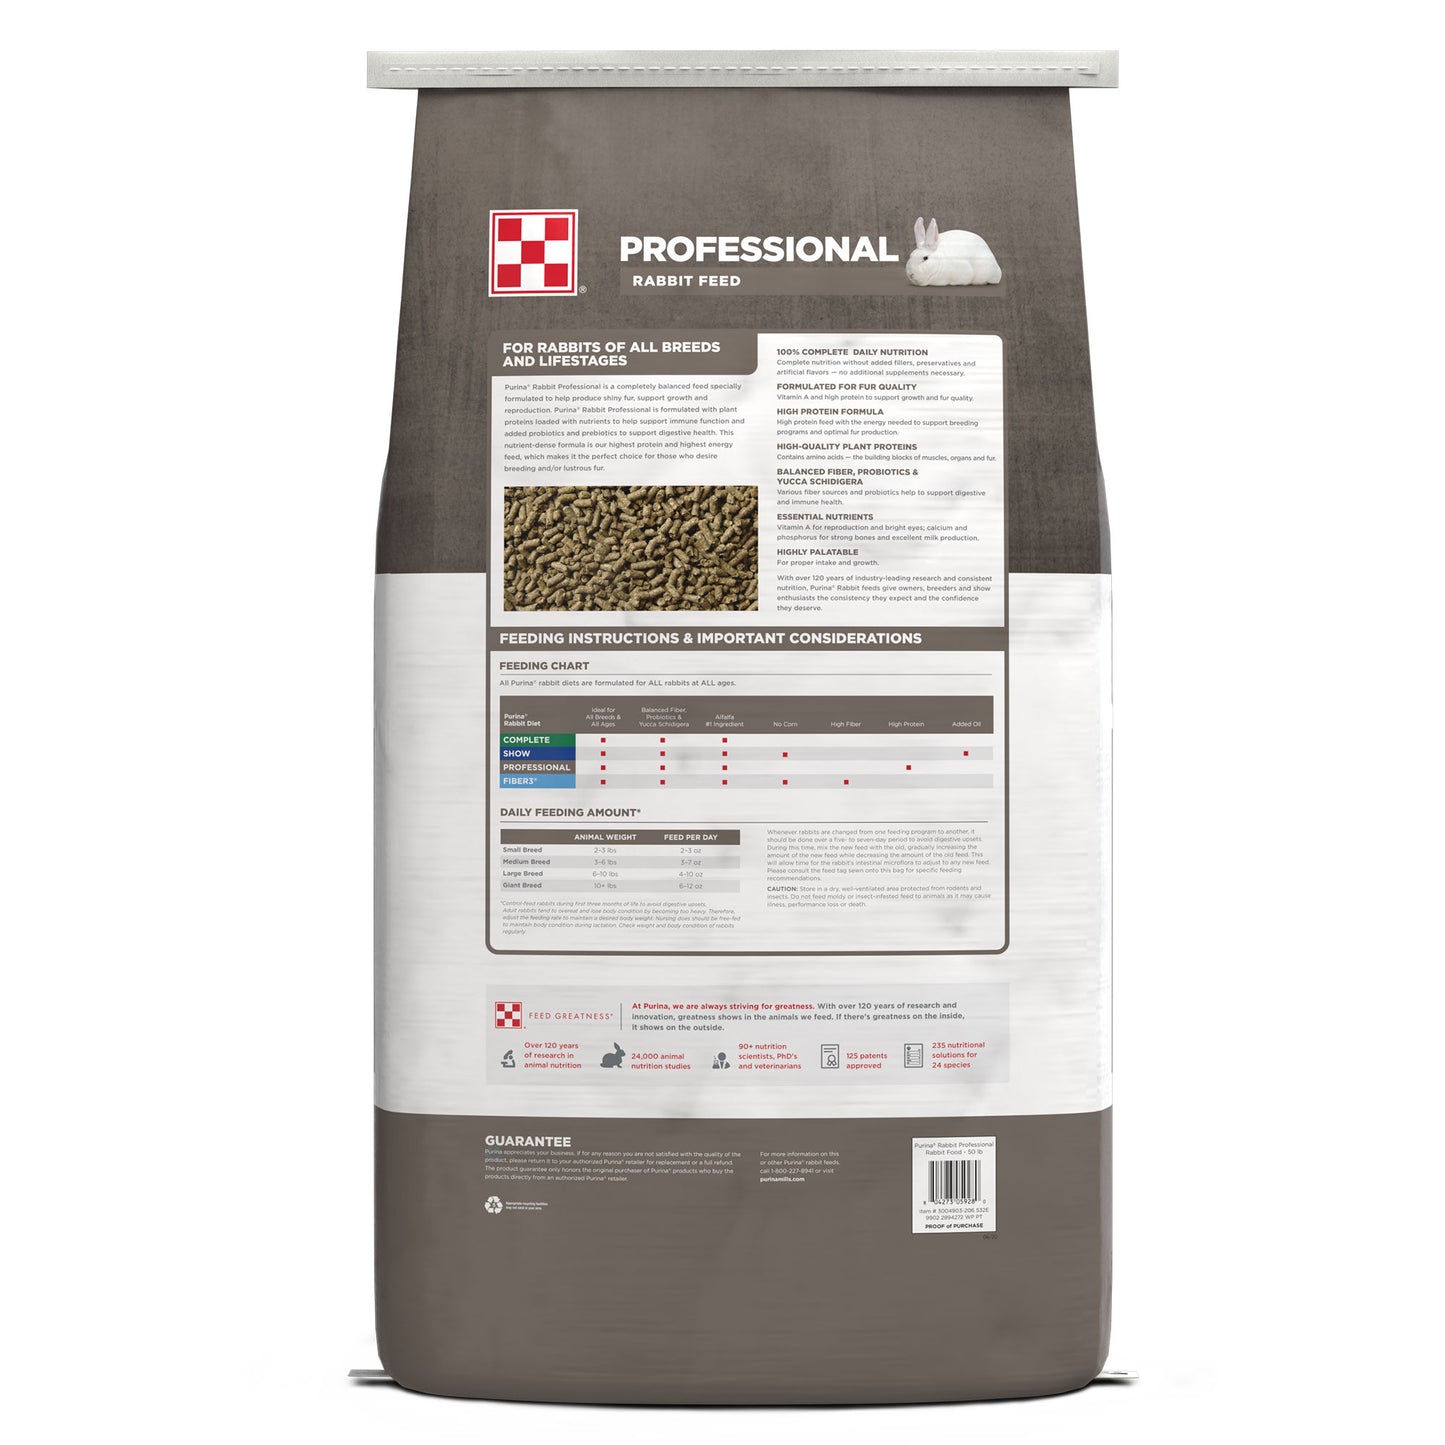 Back of the Purina Rabbit Complete Feed 50 Pound Bag